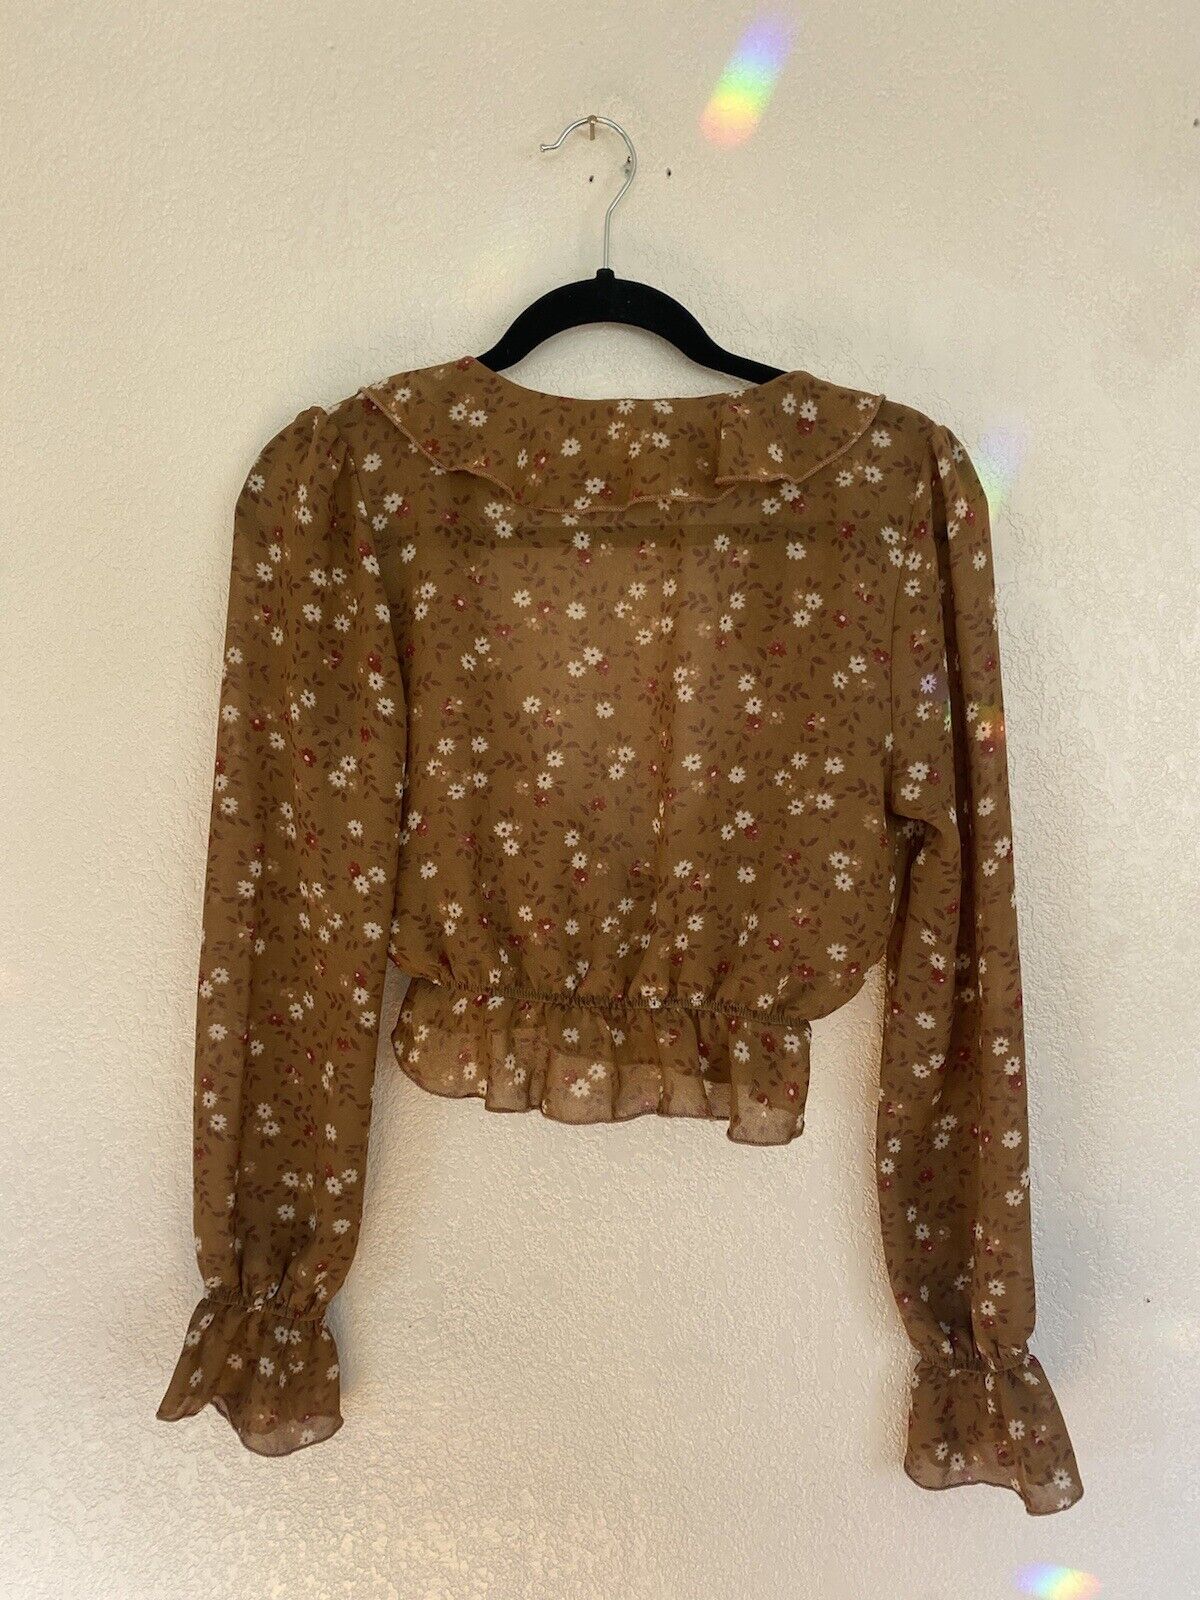 Earthy Floral Top - Wild Honey - Women's Small # 2186